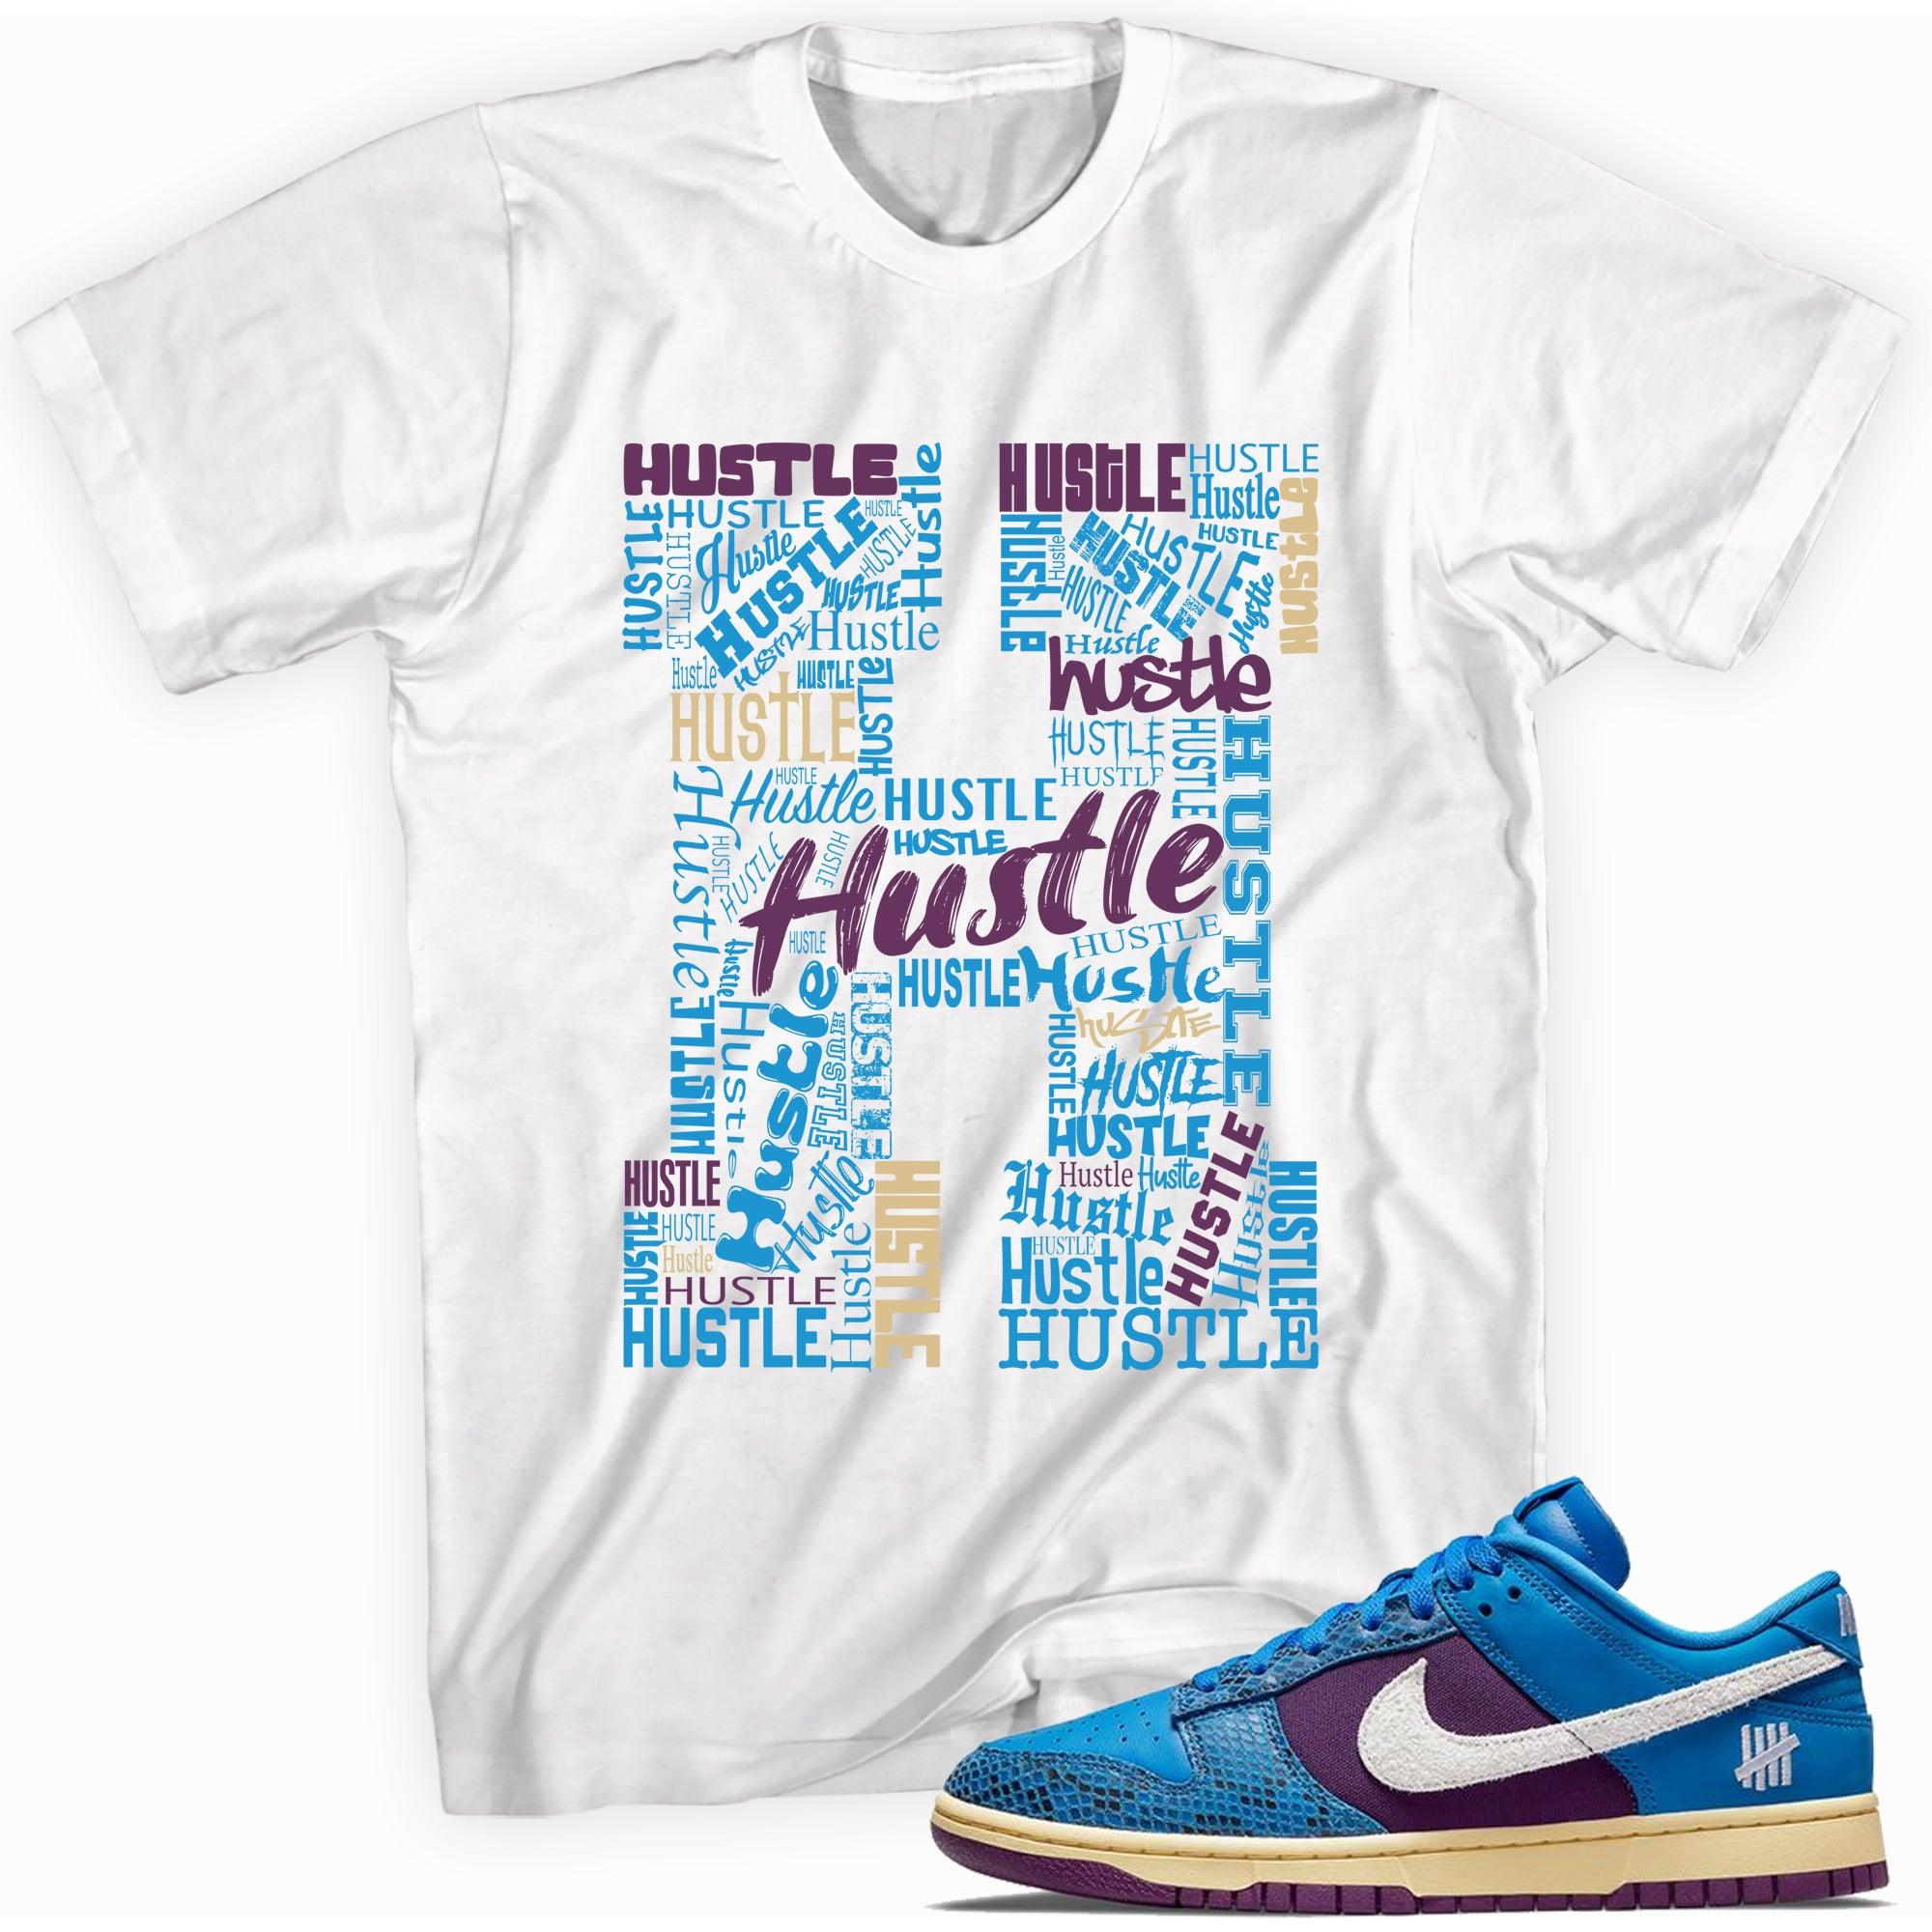 H for Hustle Shirt Nike Dunks Low Undefeated 5 On It Dunk vs AF1 photo